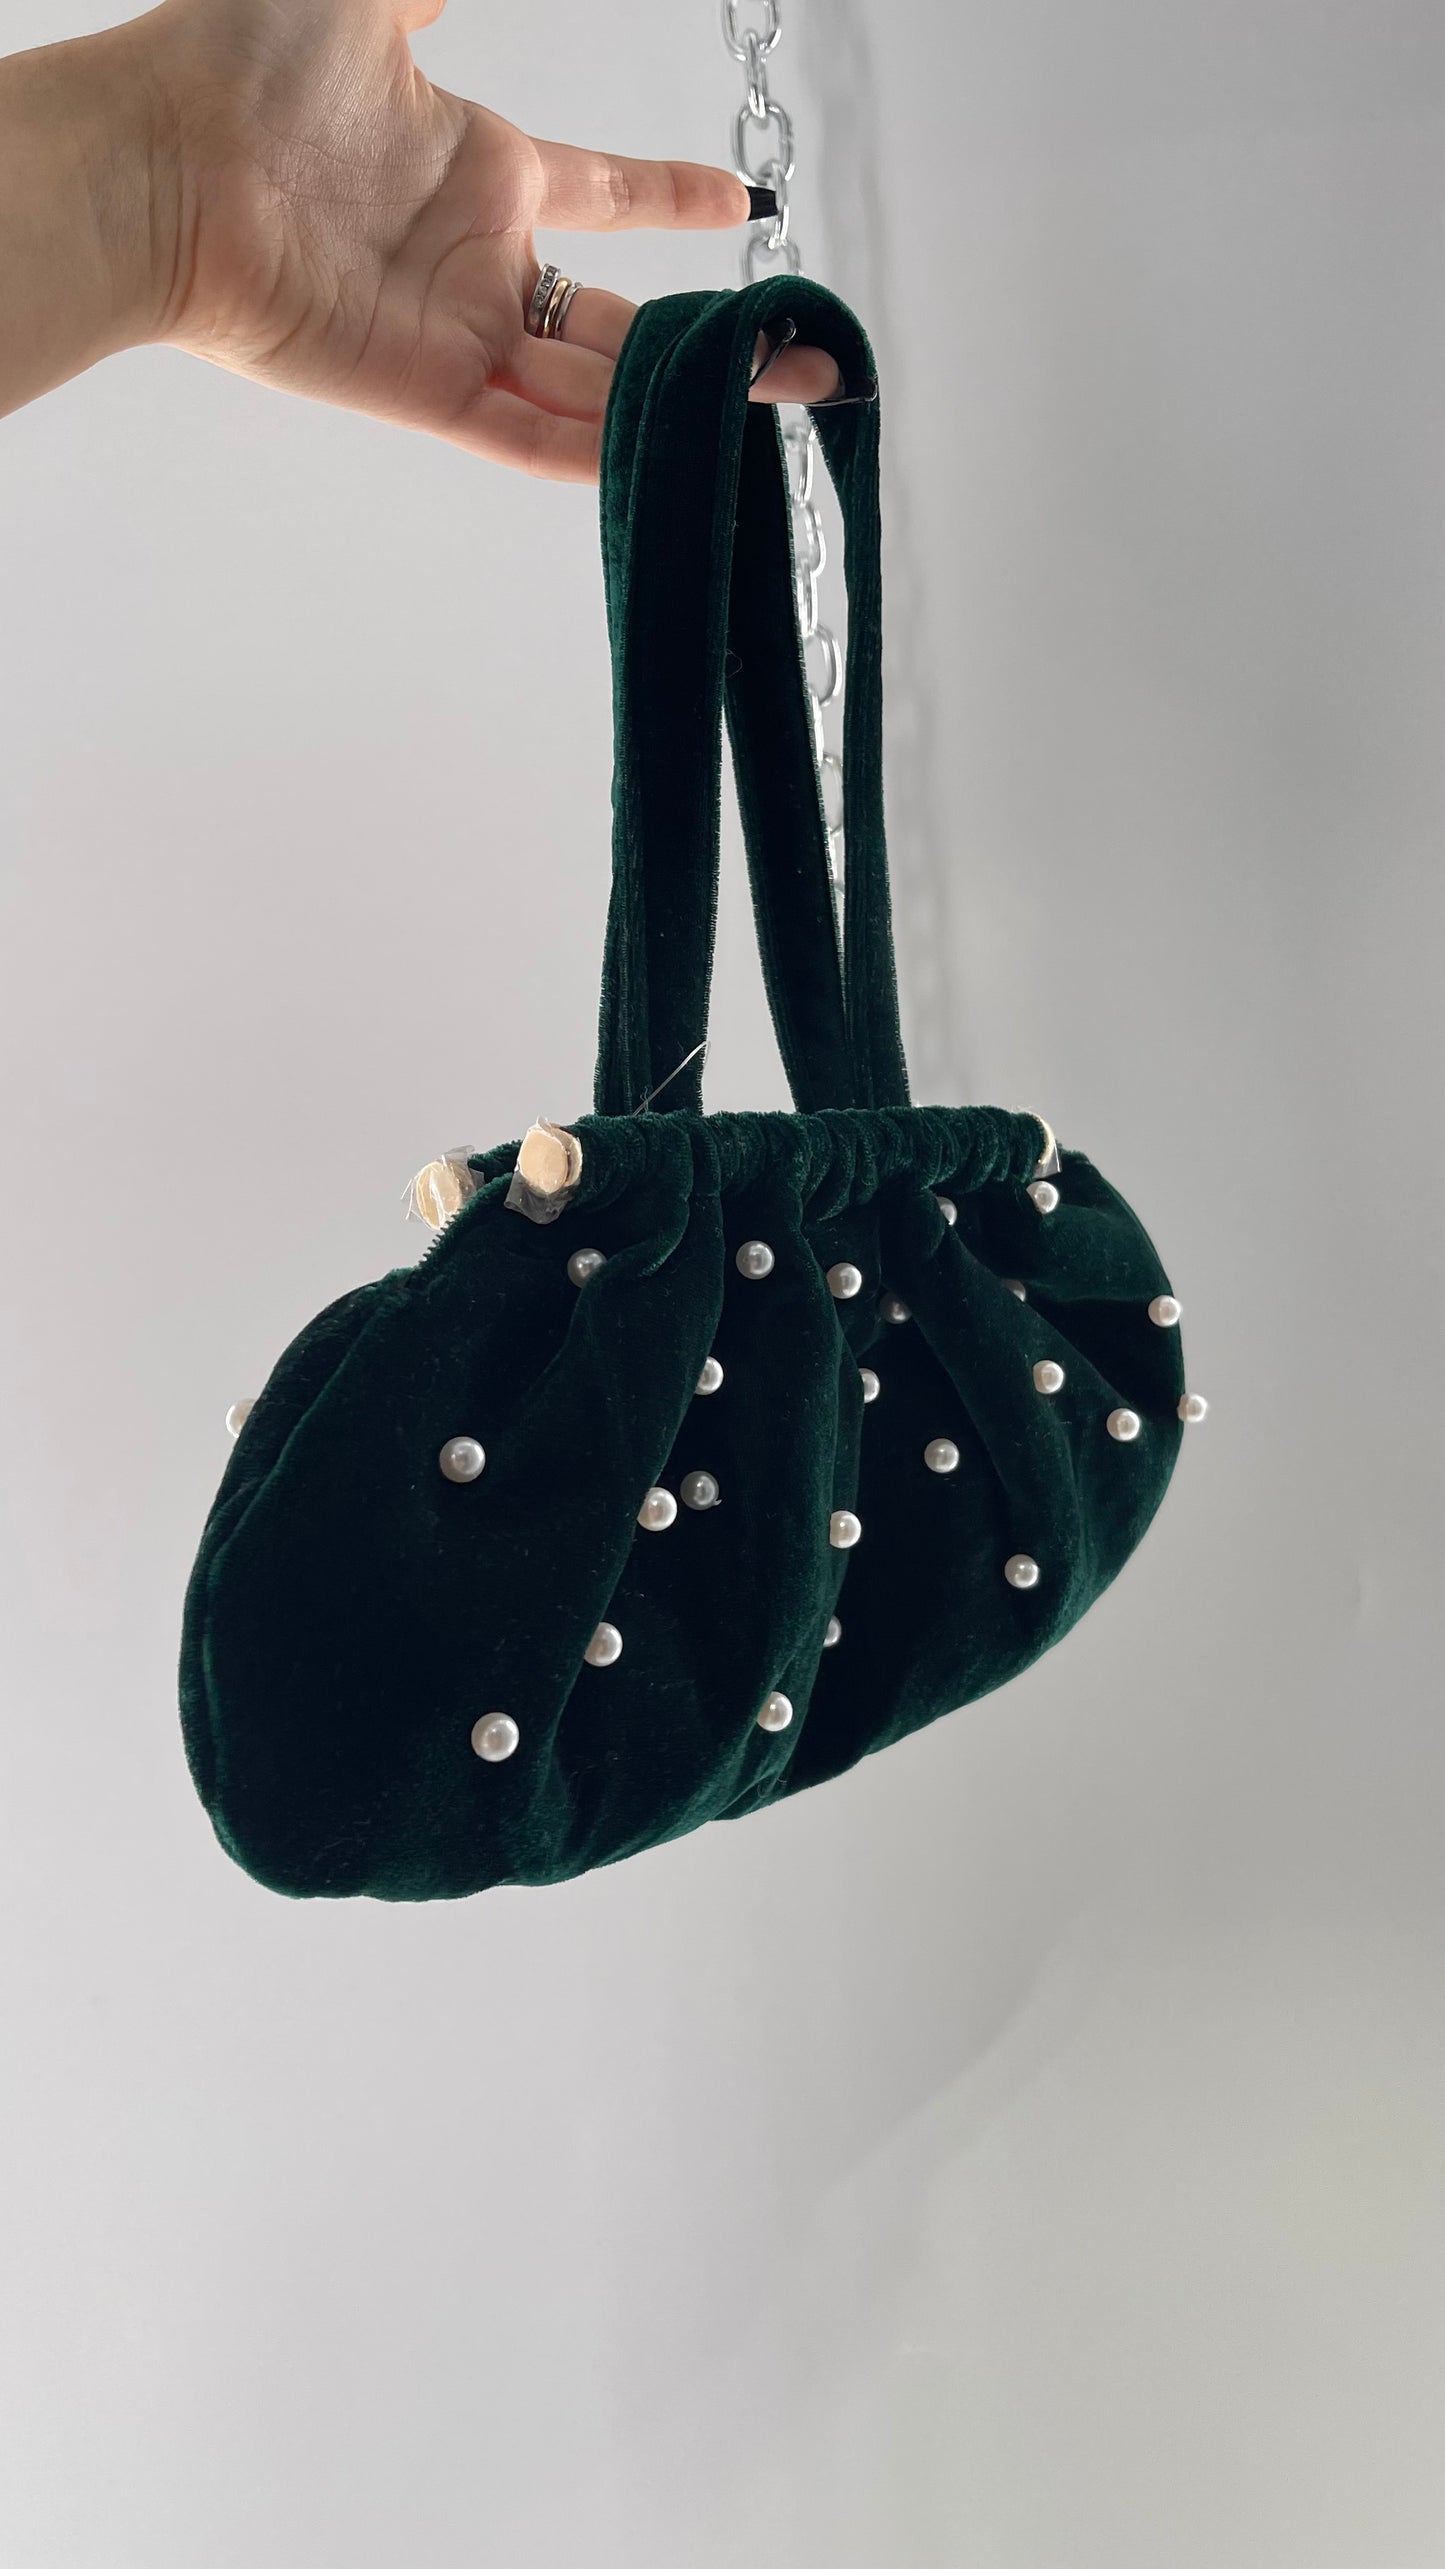 Vintage Deep Green Velvet Purse Covered in Pearls, and Featuring Gold Metal Closure Still Lined in Protective Plastic